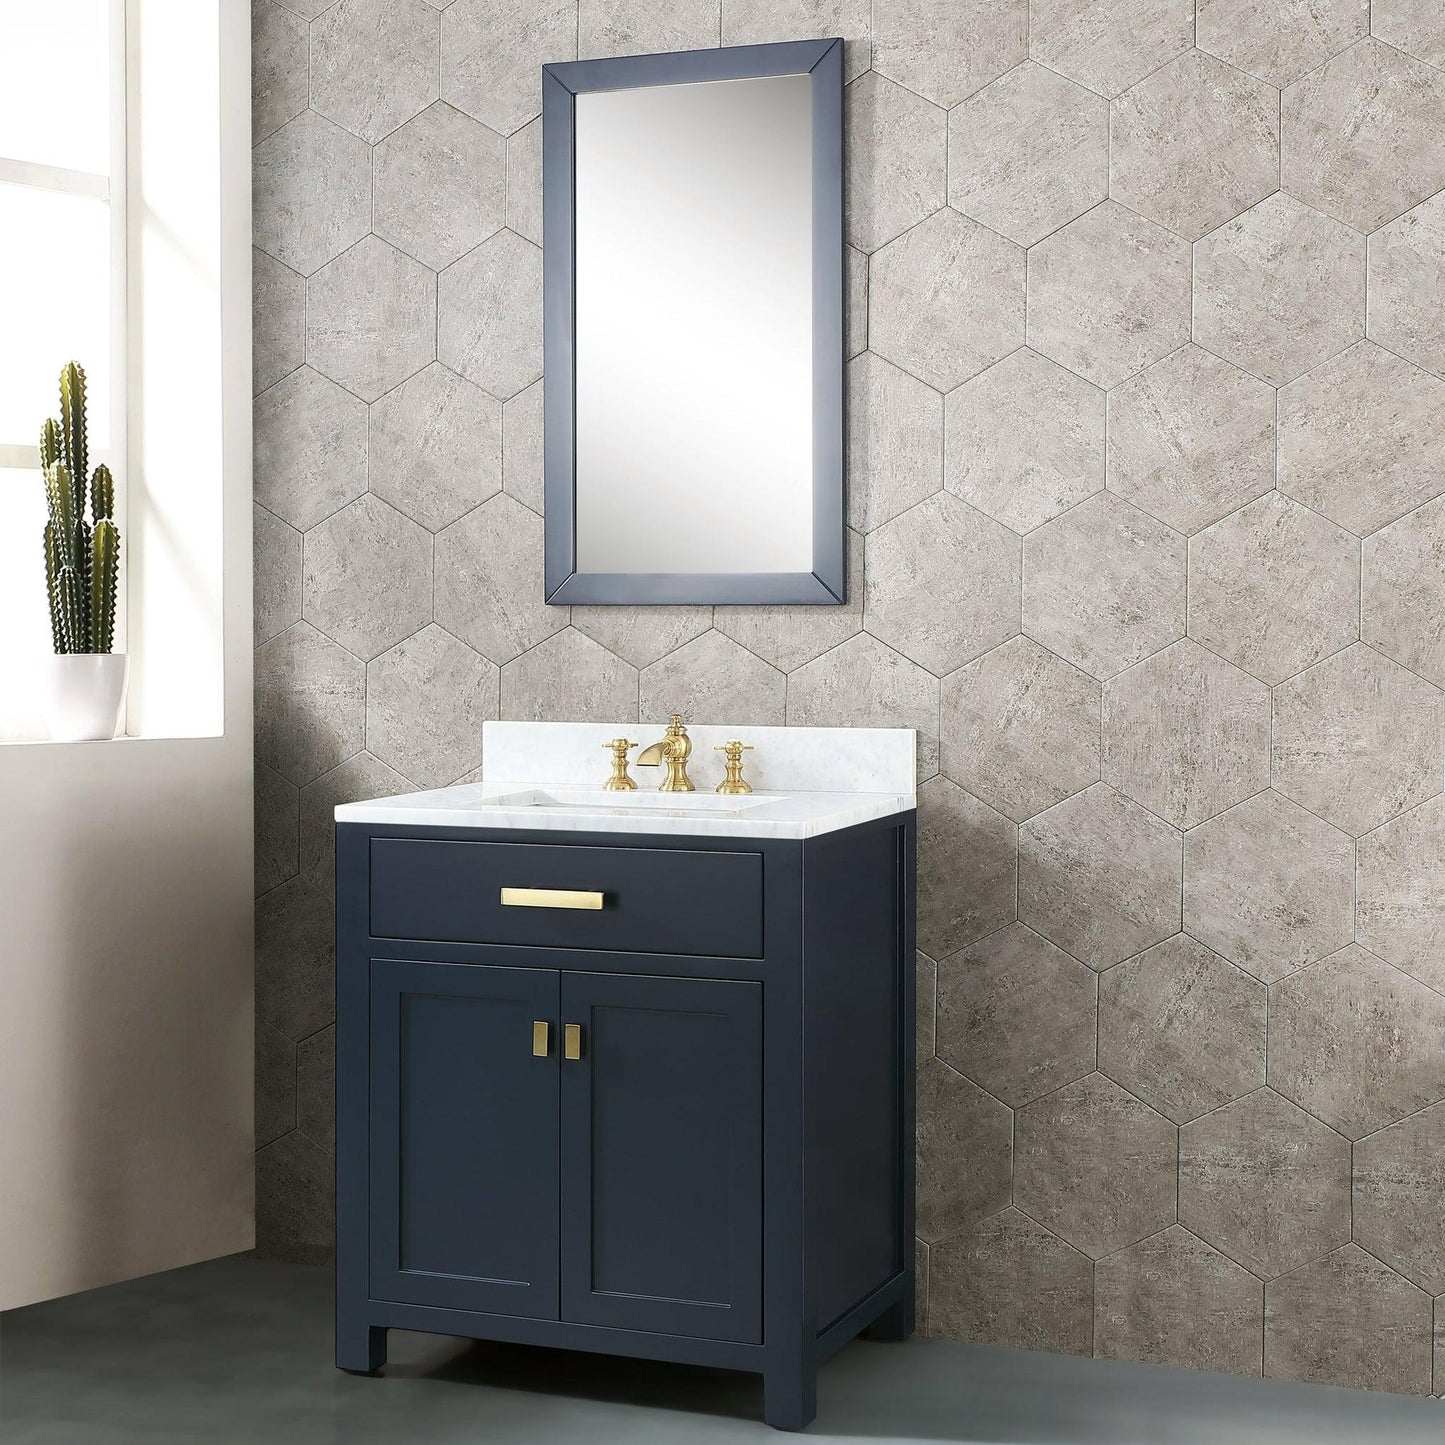 Water Creation Madison 30" Single Sink Carrara White Marble Vanity In Monarch Blue With Matching Mirror and F2-0013-06-FX Lavatory Faucet